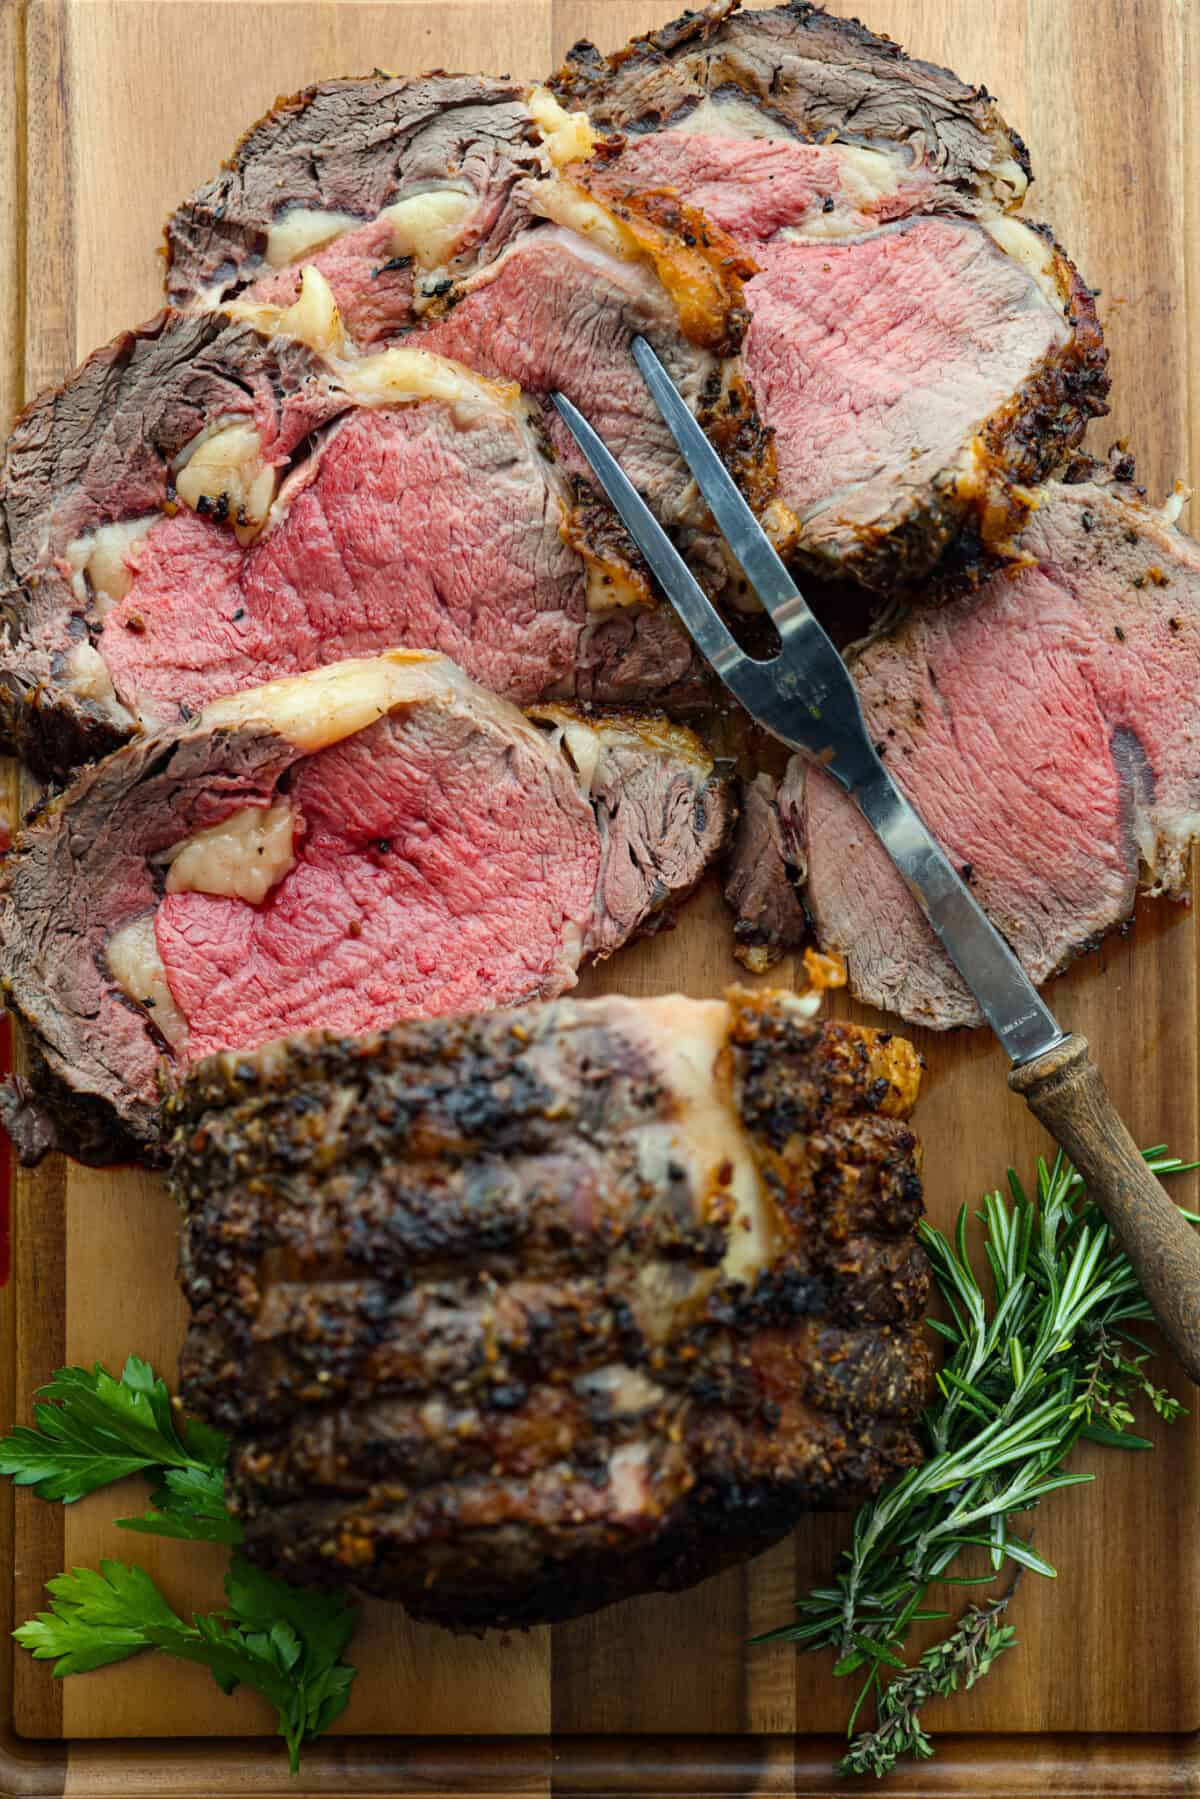 Top view of sliced ribeye roast on a wood cutting board with a large serving fork.